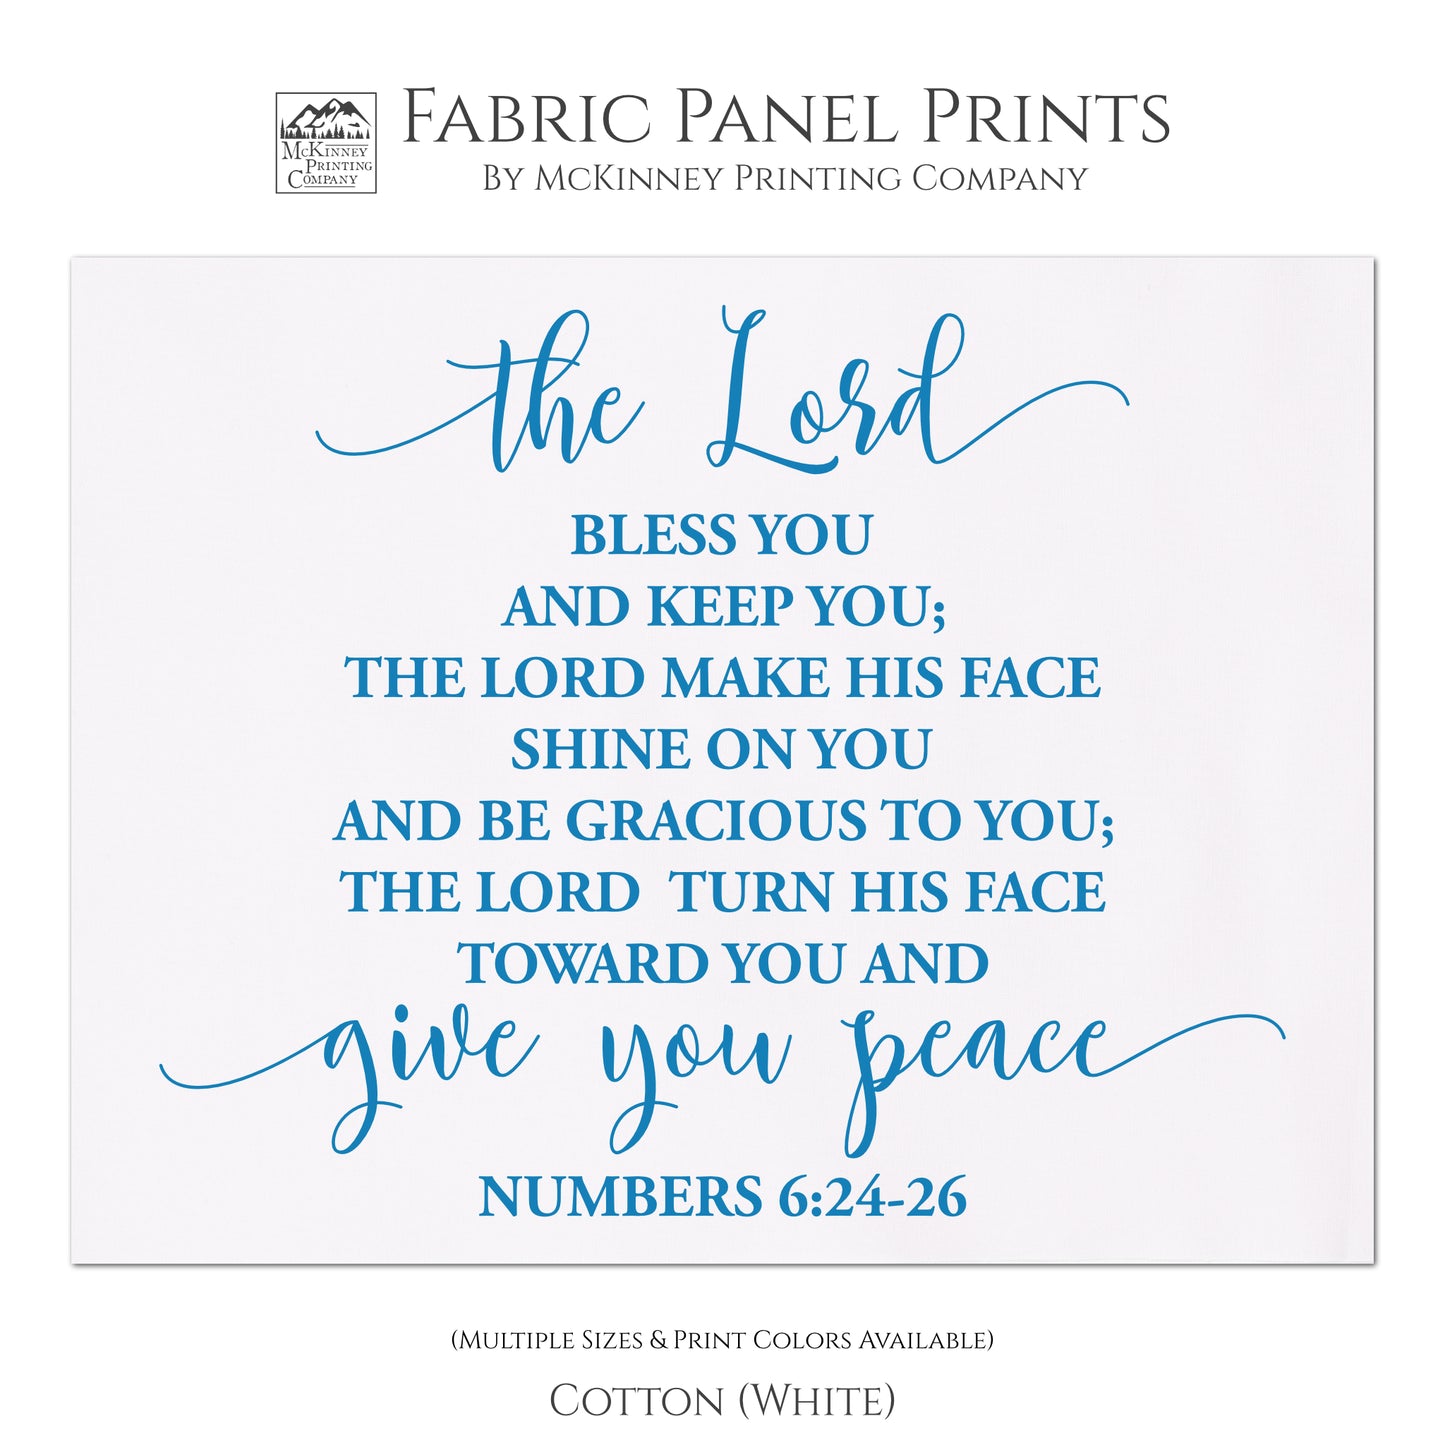 Numbers 6:24-26 - The Lord bless you and keep you; The Lord make His face shine on you and be gracious to you; The Lord turn his face toward you and give you peace. - Fabric Panel Print, Quilt Block - Cotton, White